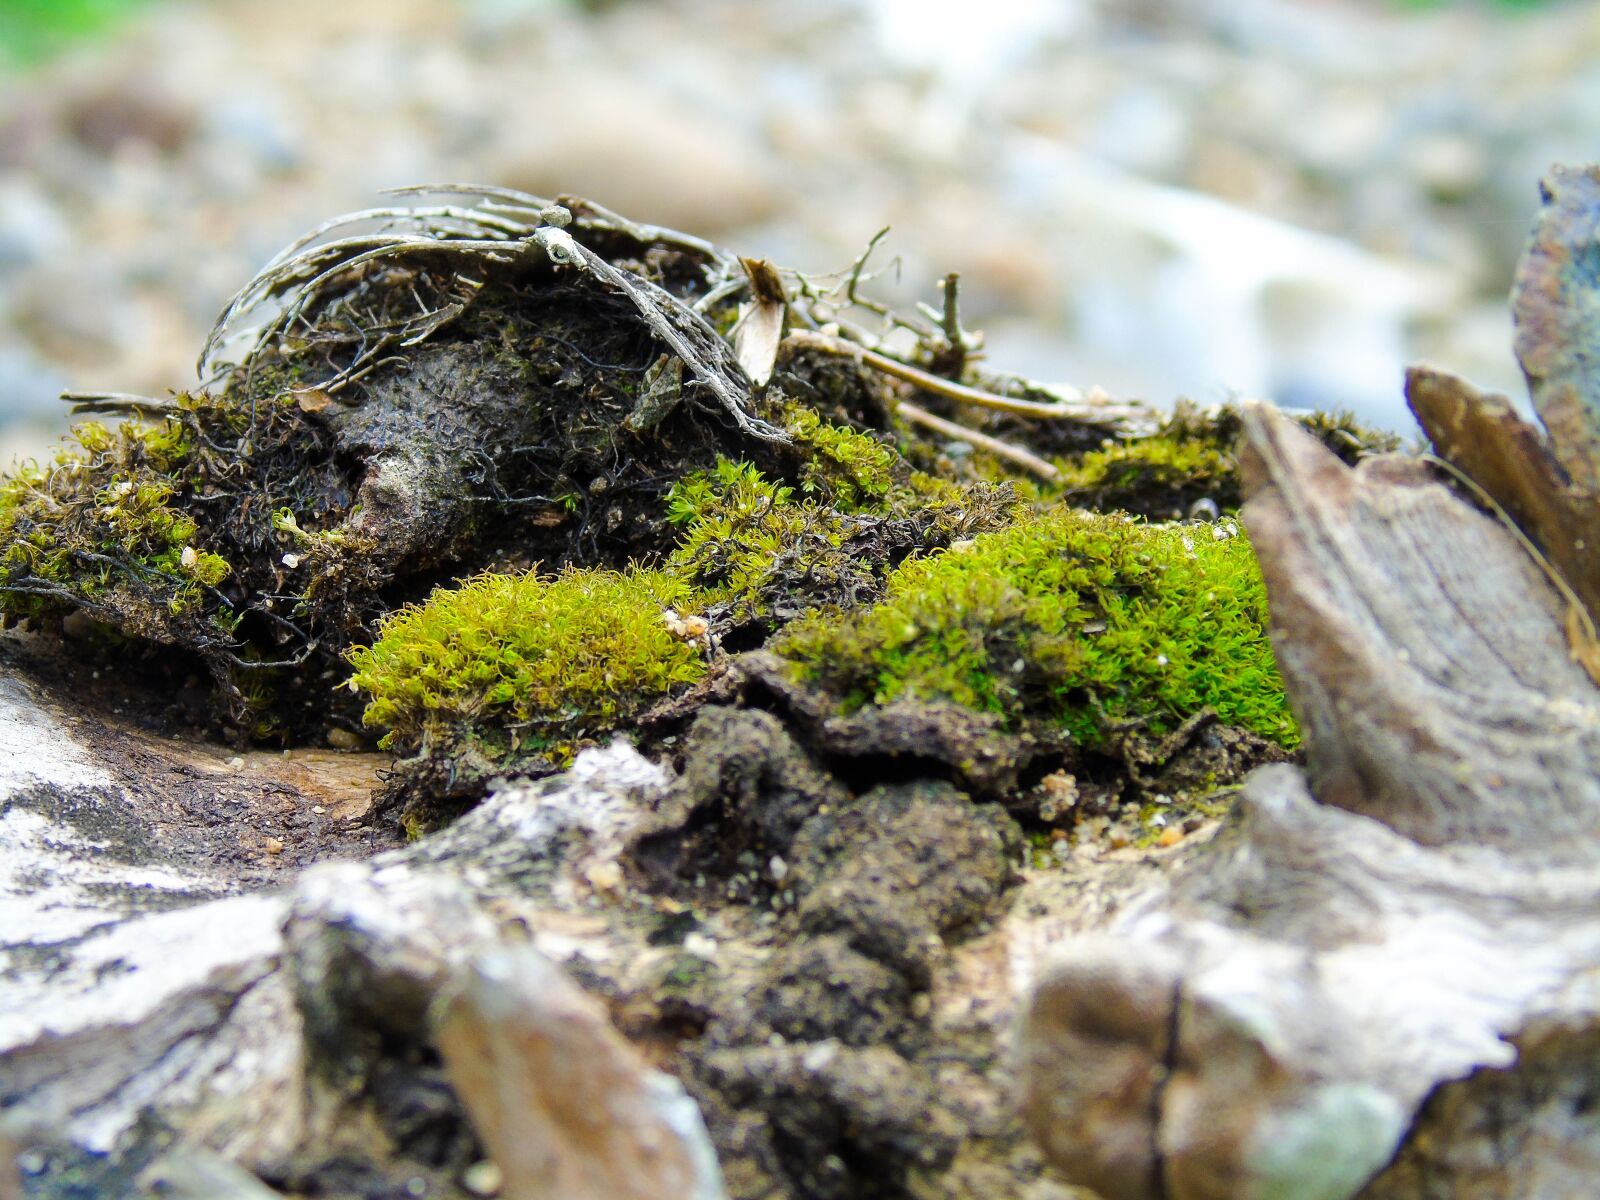 Sony Cyber-shot DSC-H400 sample photo. Moss, root, nature photography